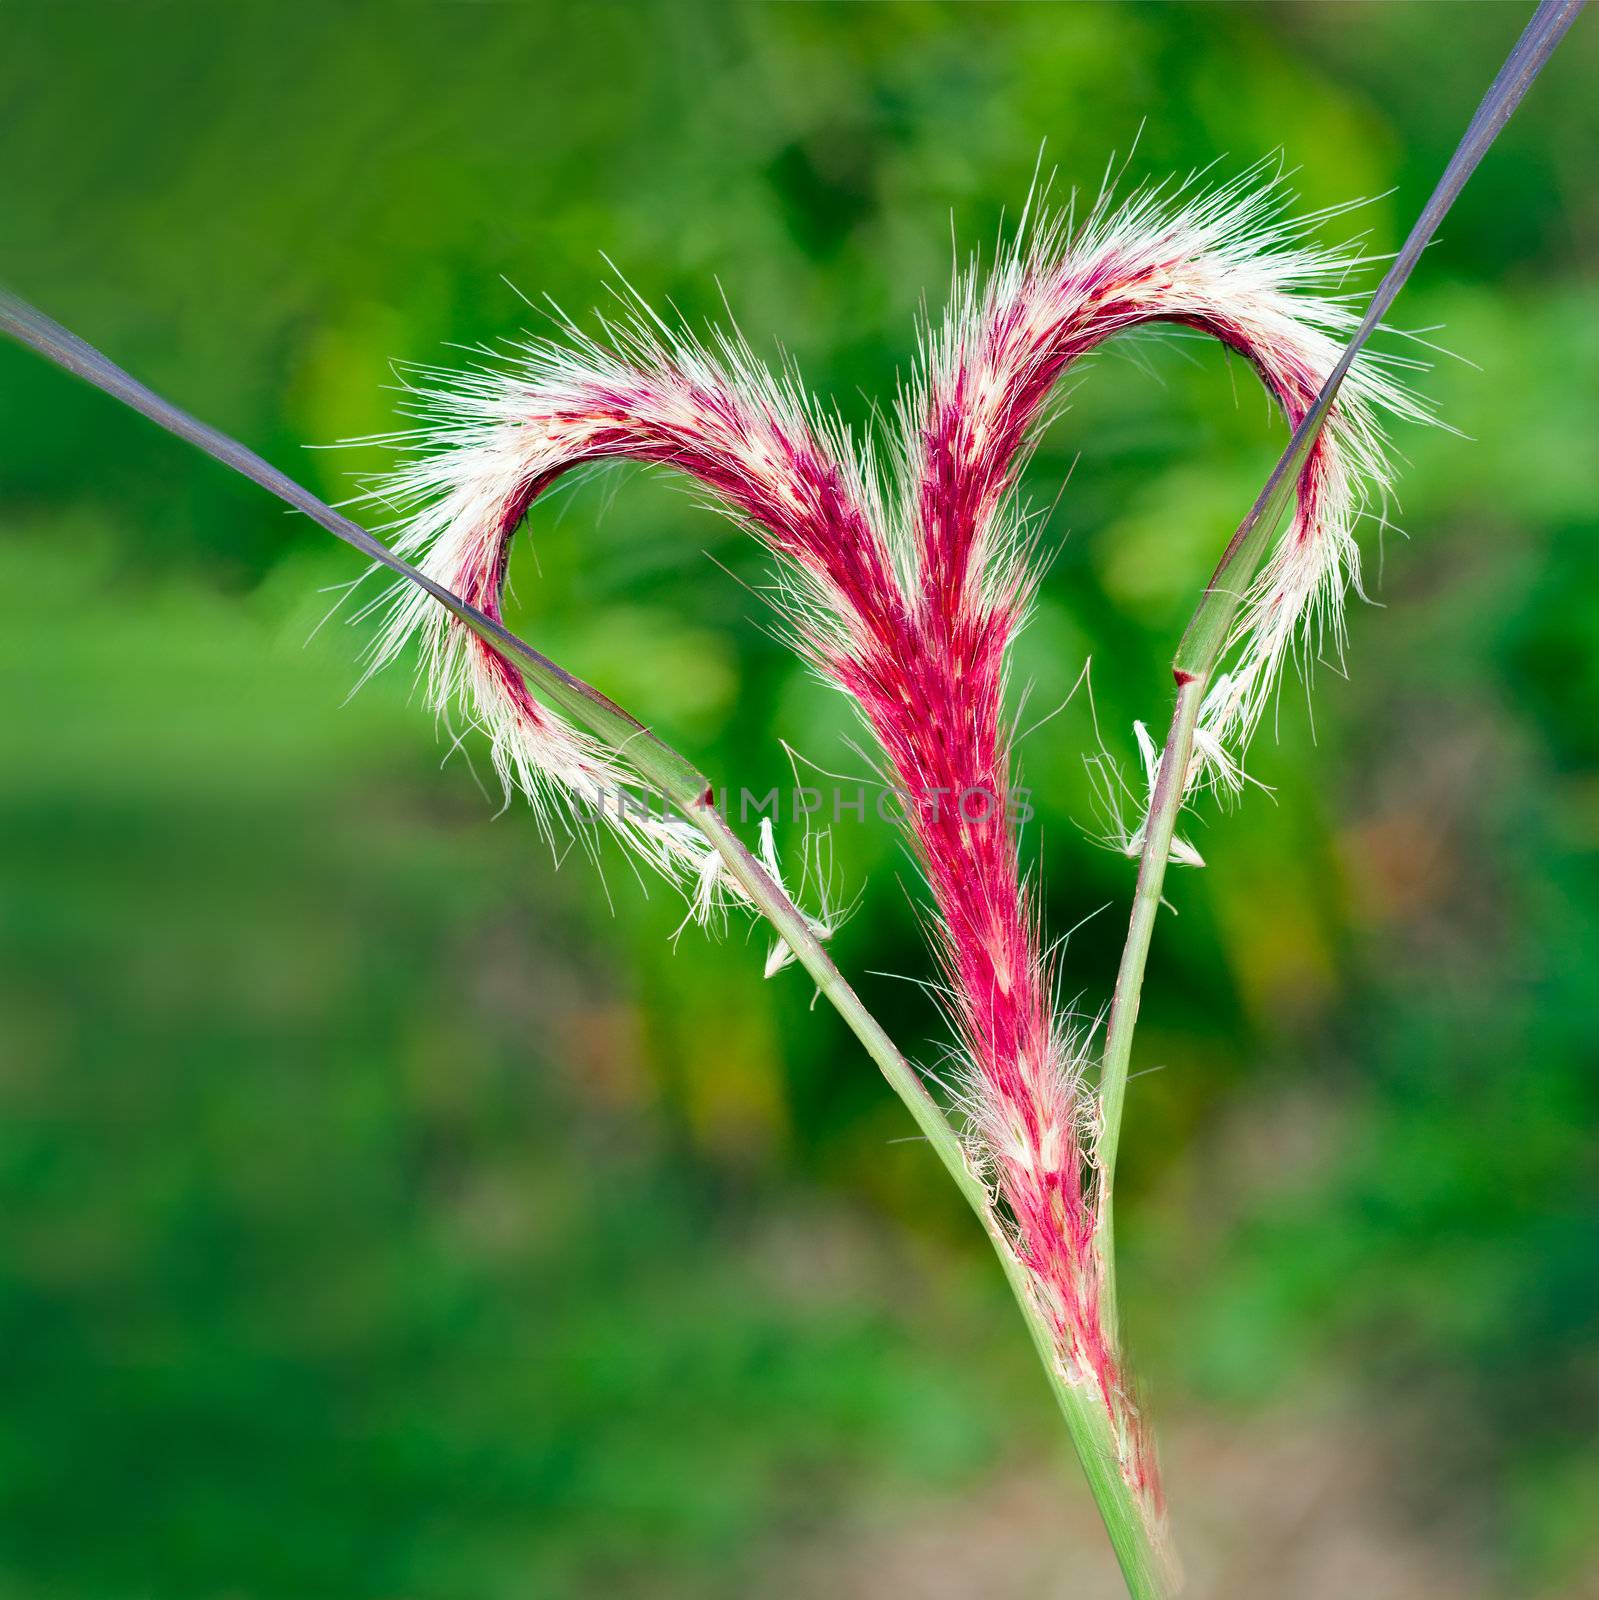 A beautiful vibrant red grass flower forming a love heart with a green natural background